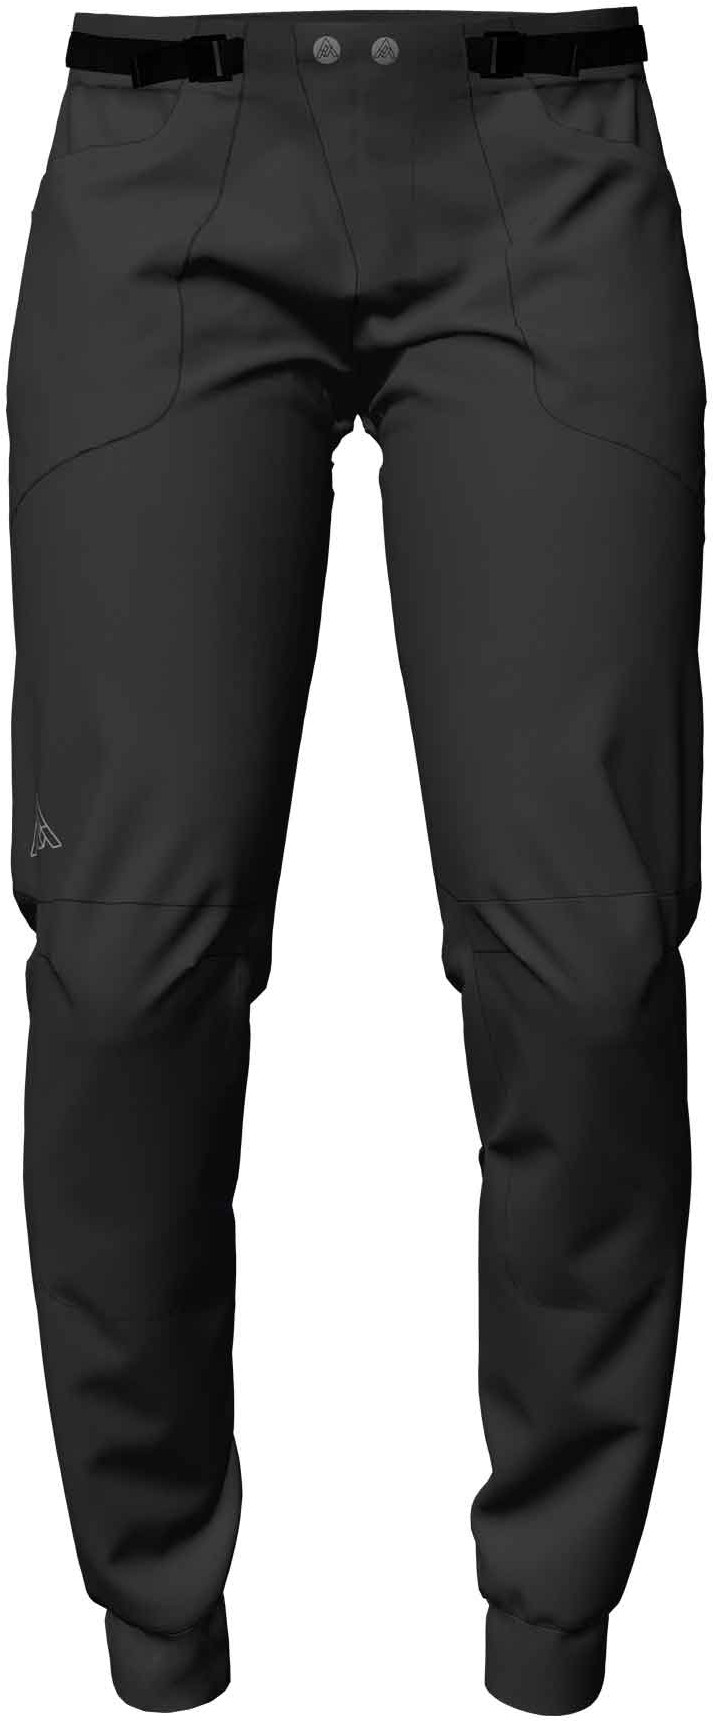 Glidepath Trousers image 0